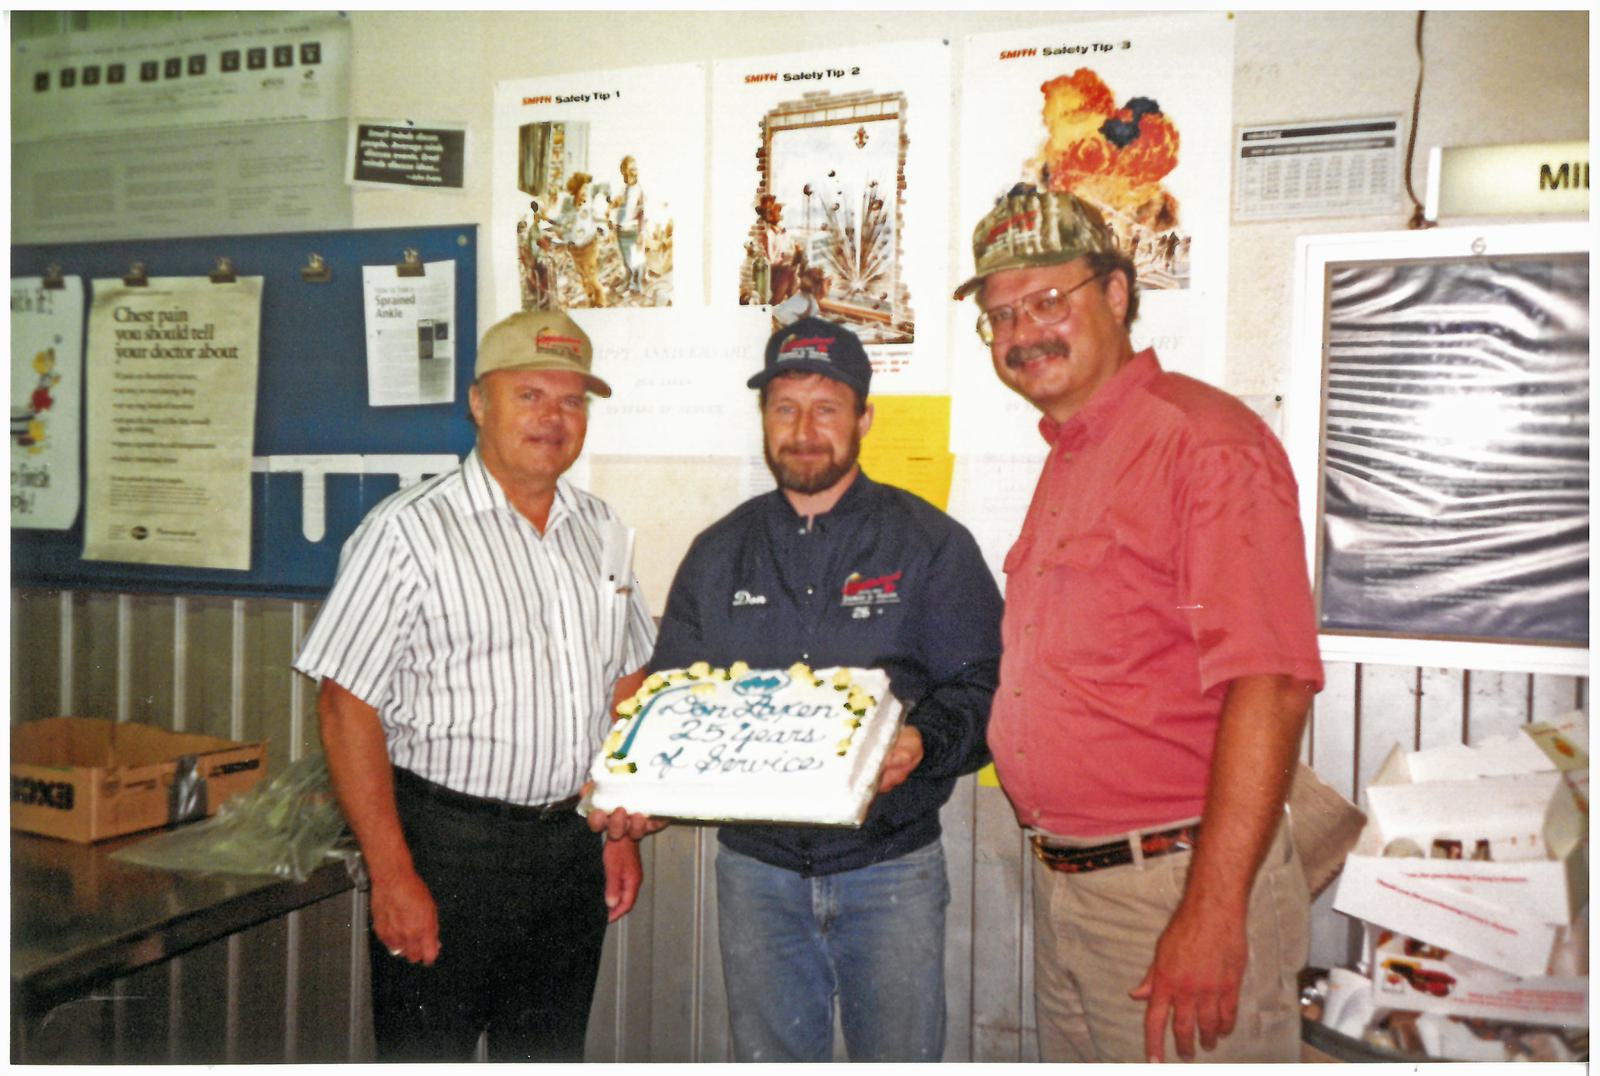 Donnie Laxen celebrates 25 years of service